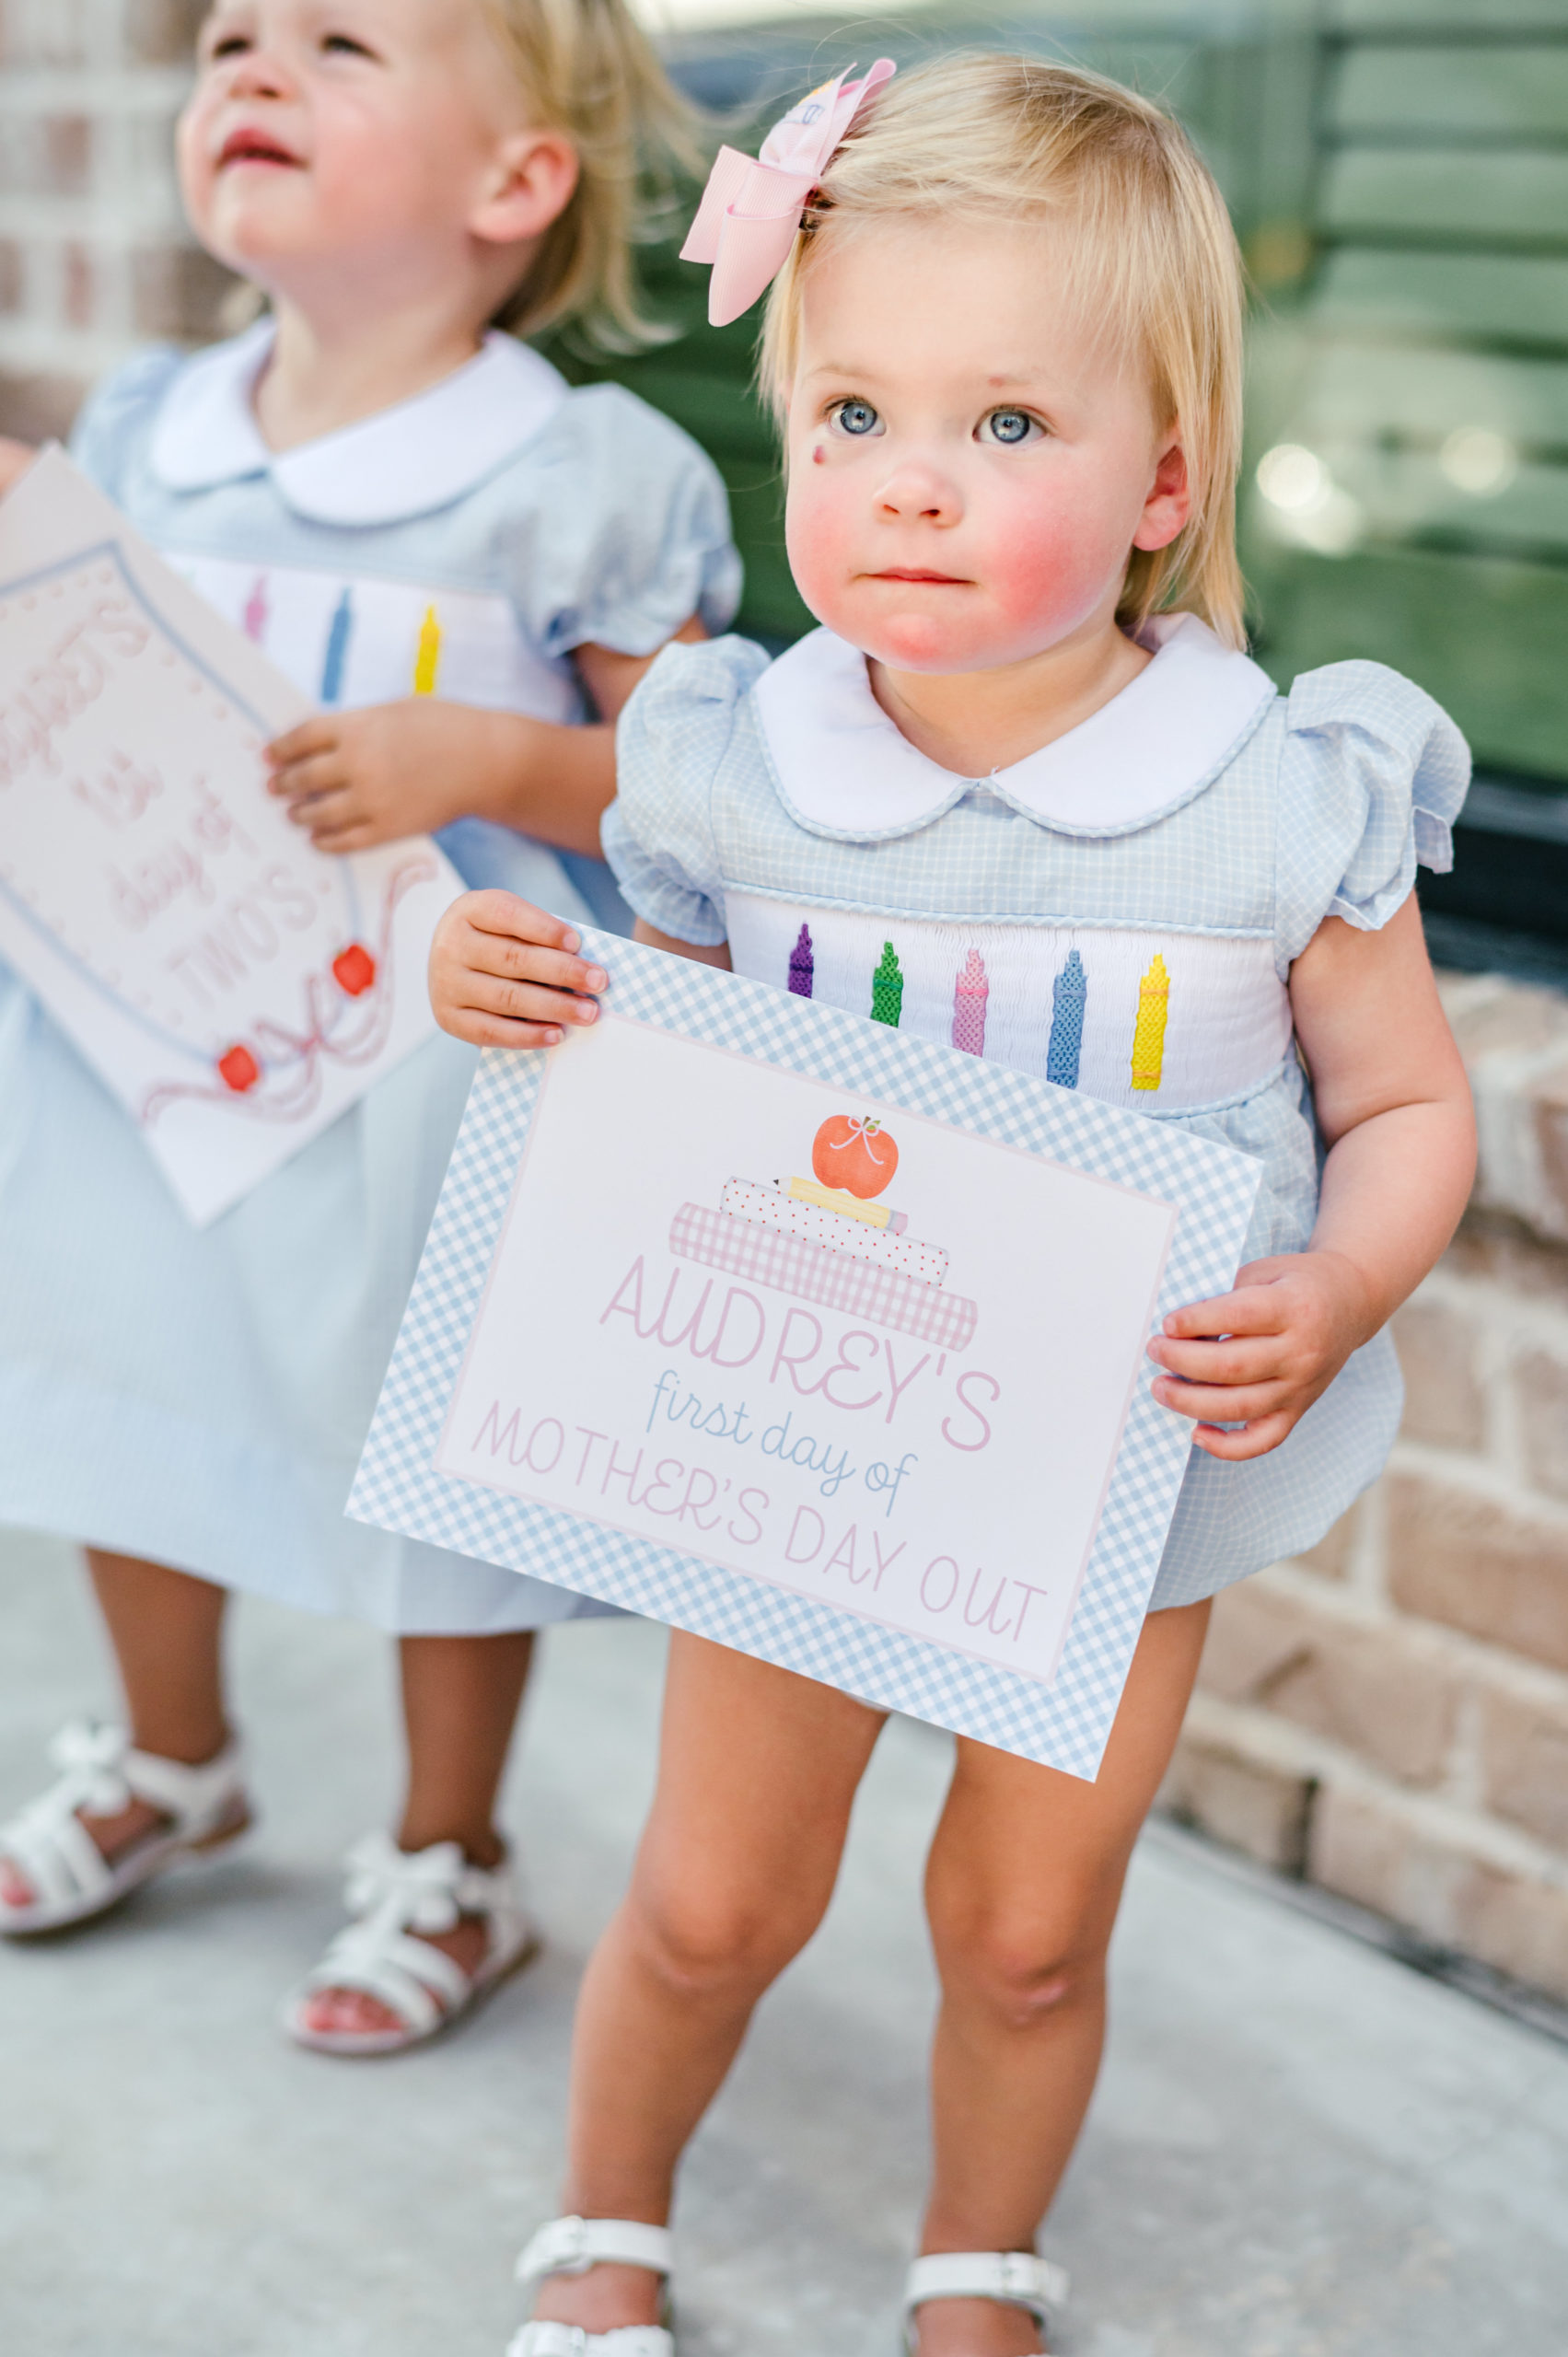 Little girl holding a milestone card labeled "Audreys first day of mothers day out"